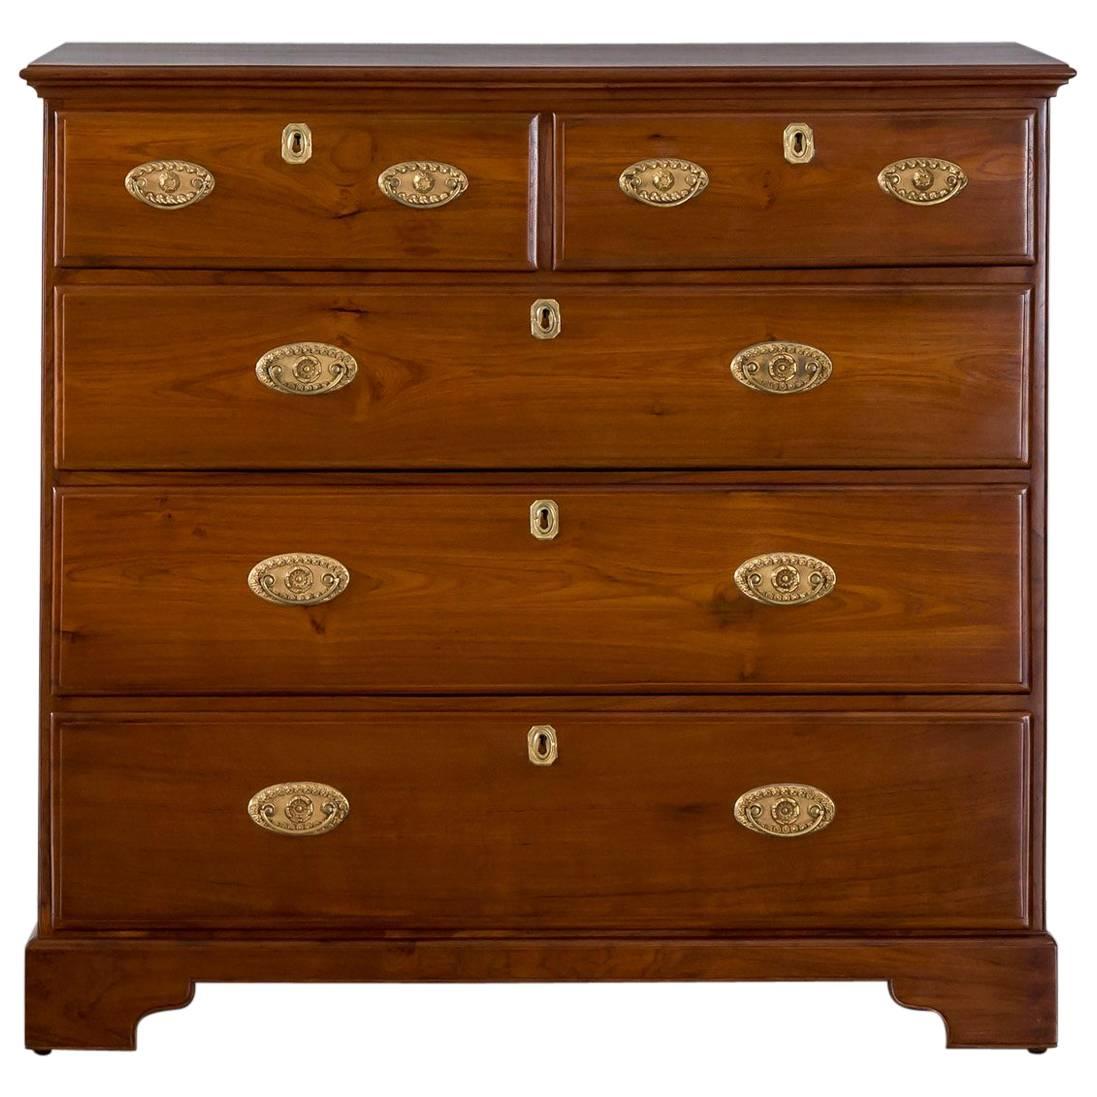 Antique Anglo-Indian or British Colonial Teakwood Chest of Drawers For Sale